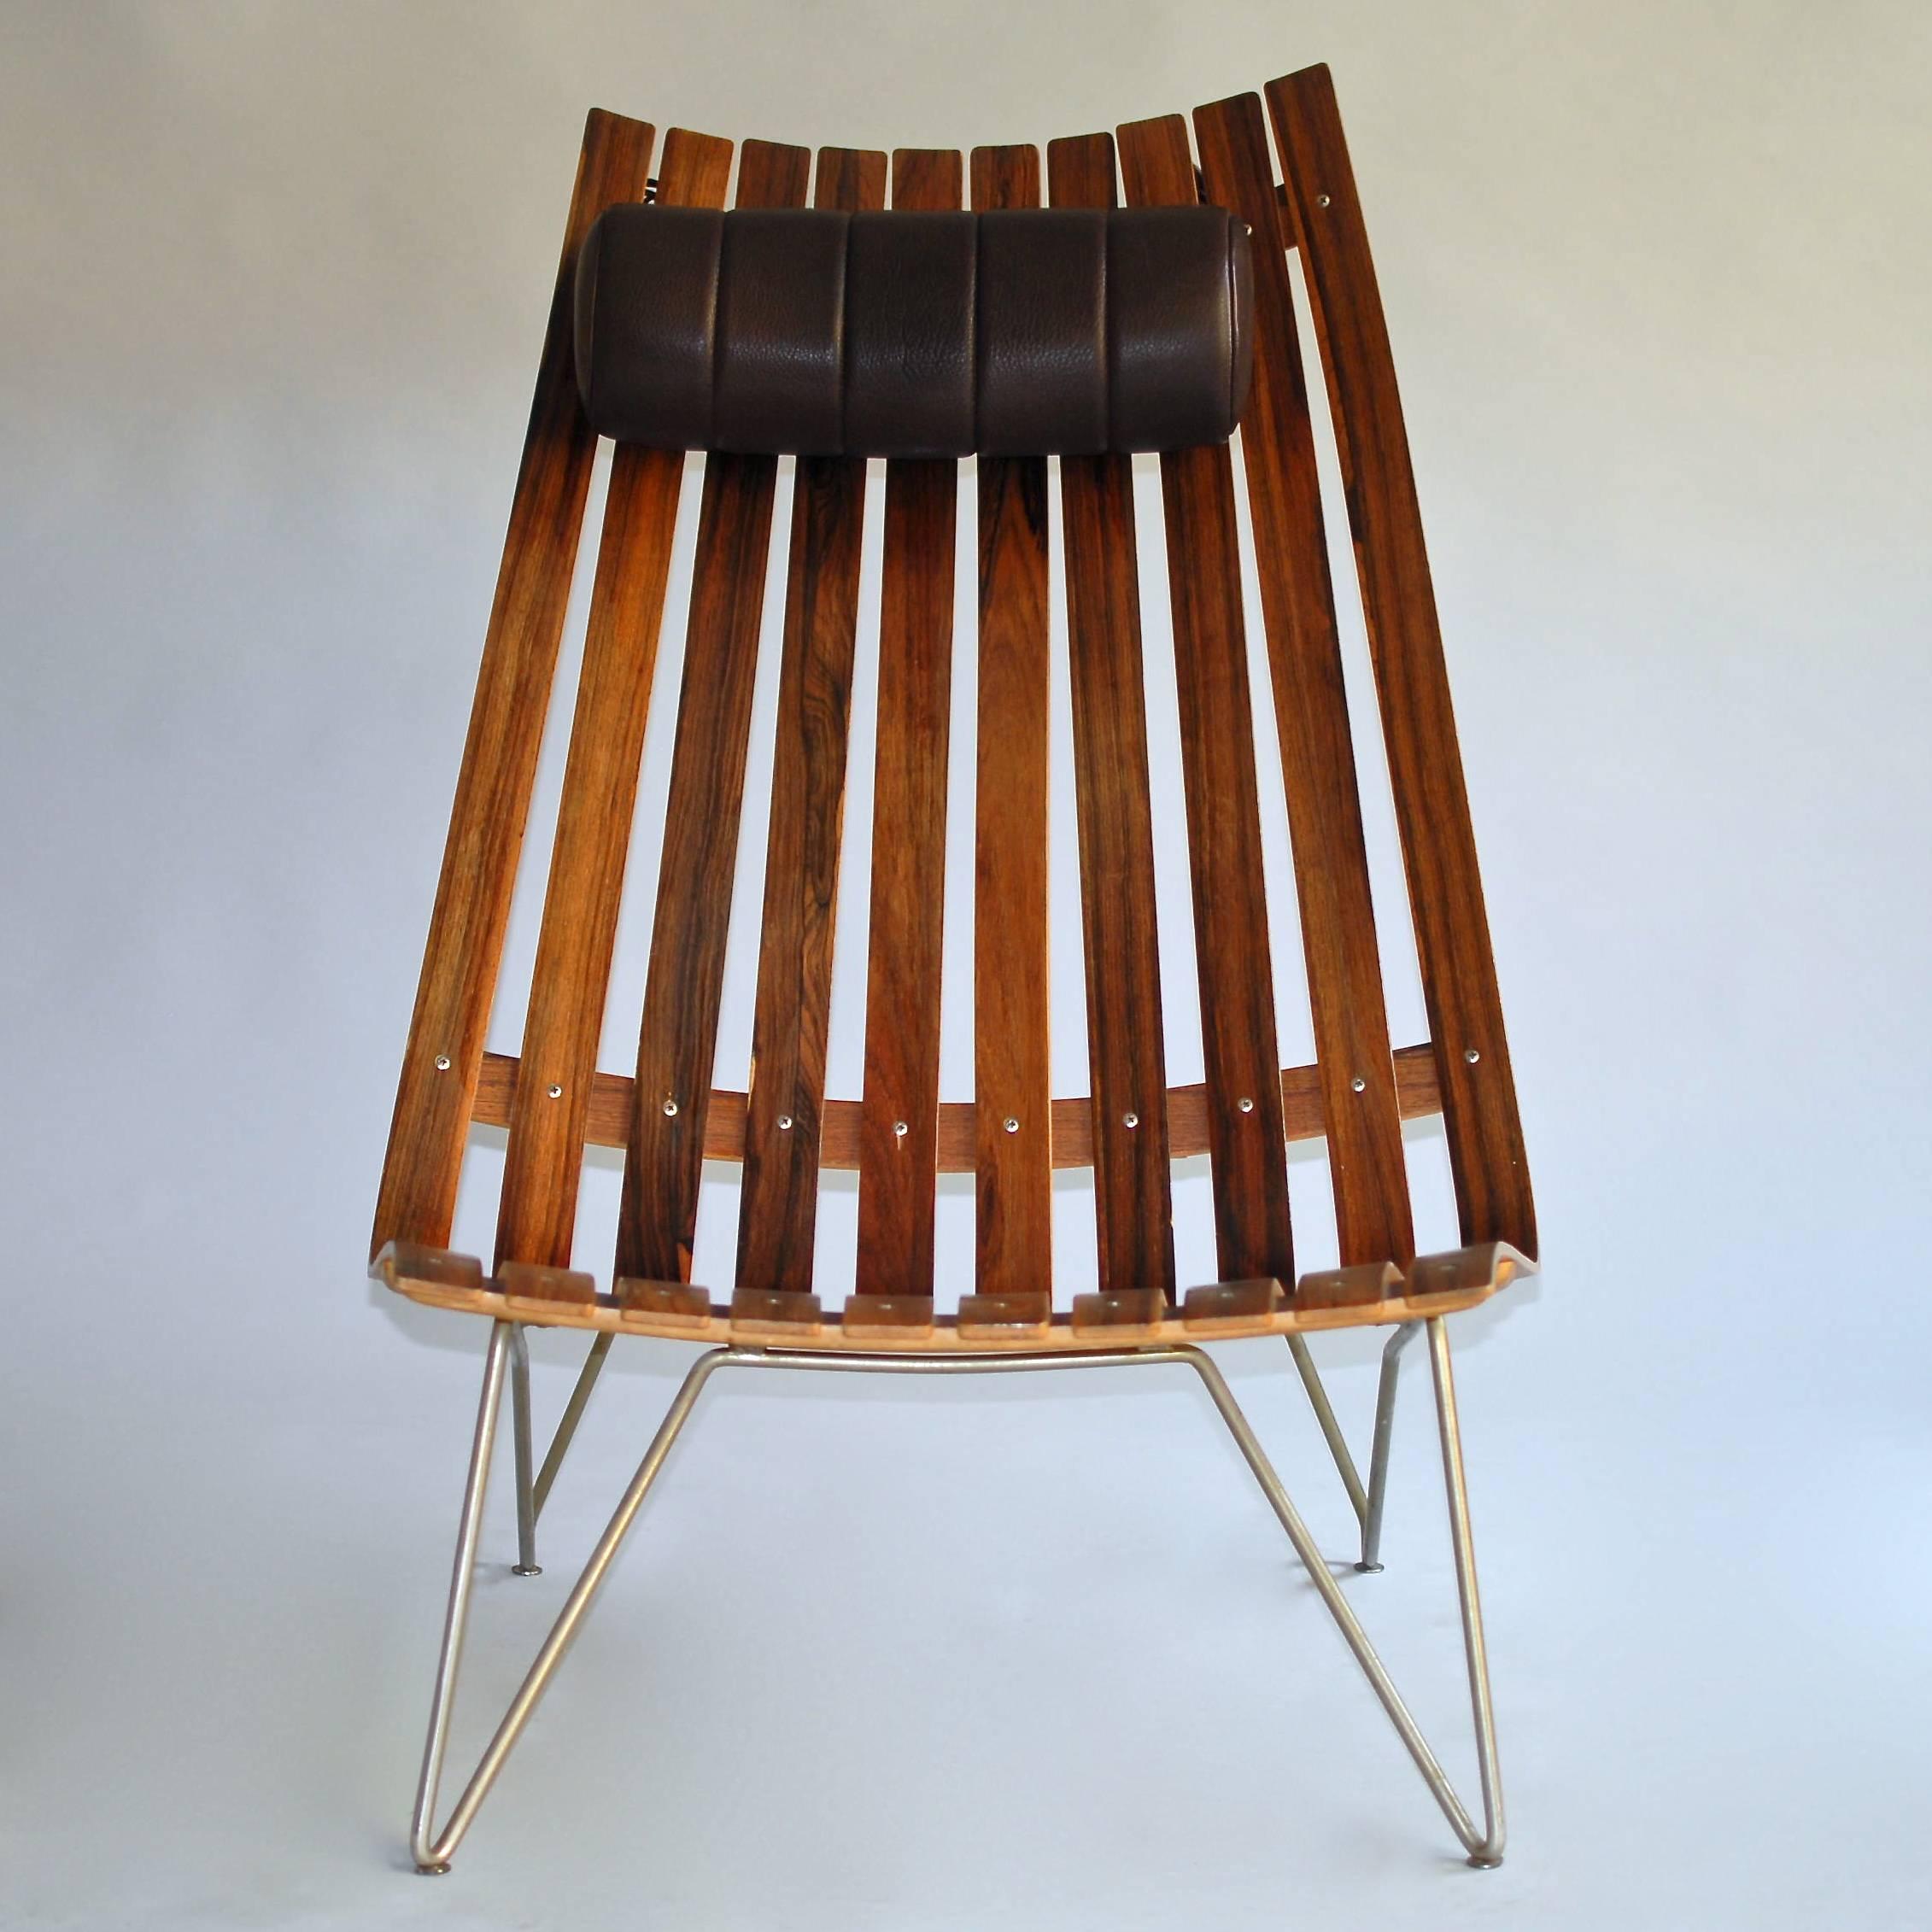 Hans Brattrud Scandia senior rosewood and oak, Norway, 1960s.
Steel rod base. Additional cushion of newer production. Manufactured in Norway by Hove Møbler, circa 1960. Particular model with front in rosewood and back in oak veneer.